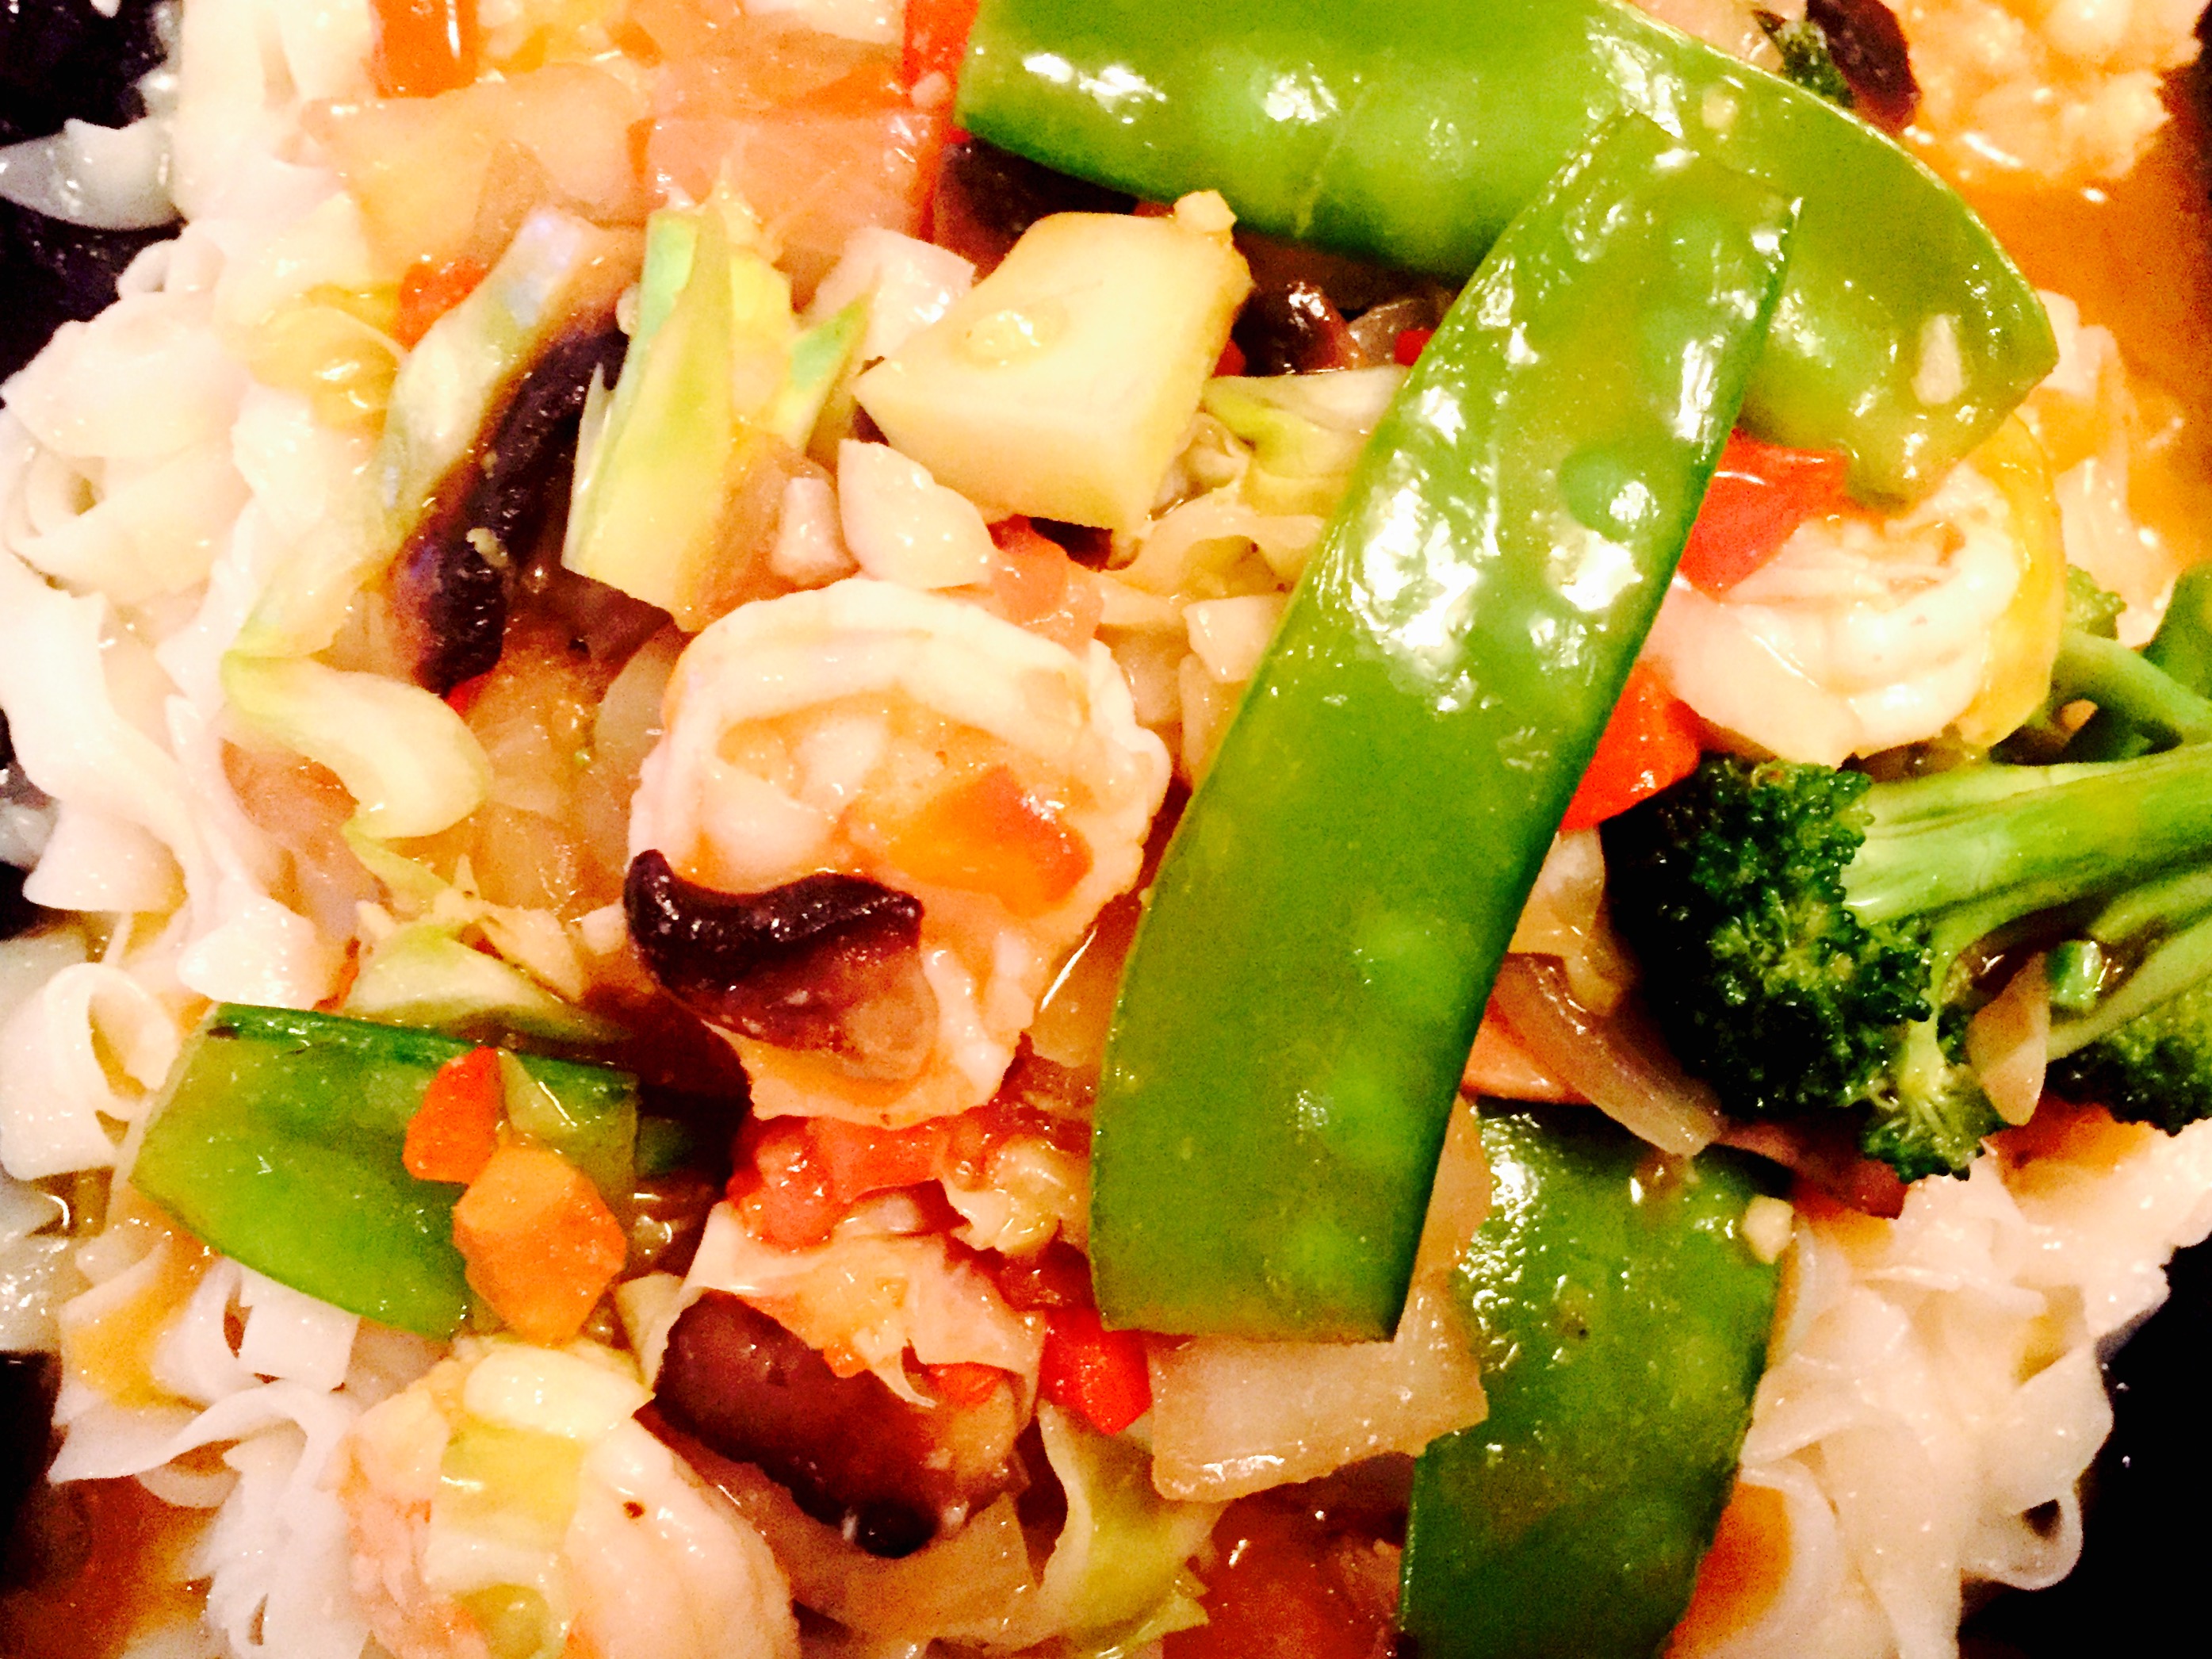 Shrimp pad thai with fresh garden vegetables and a sweet and spicy soy free sauce